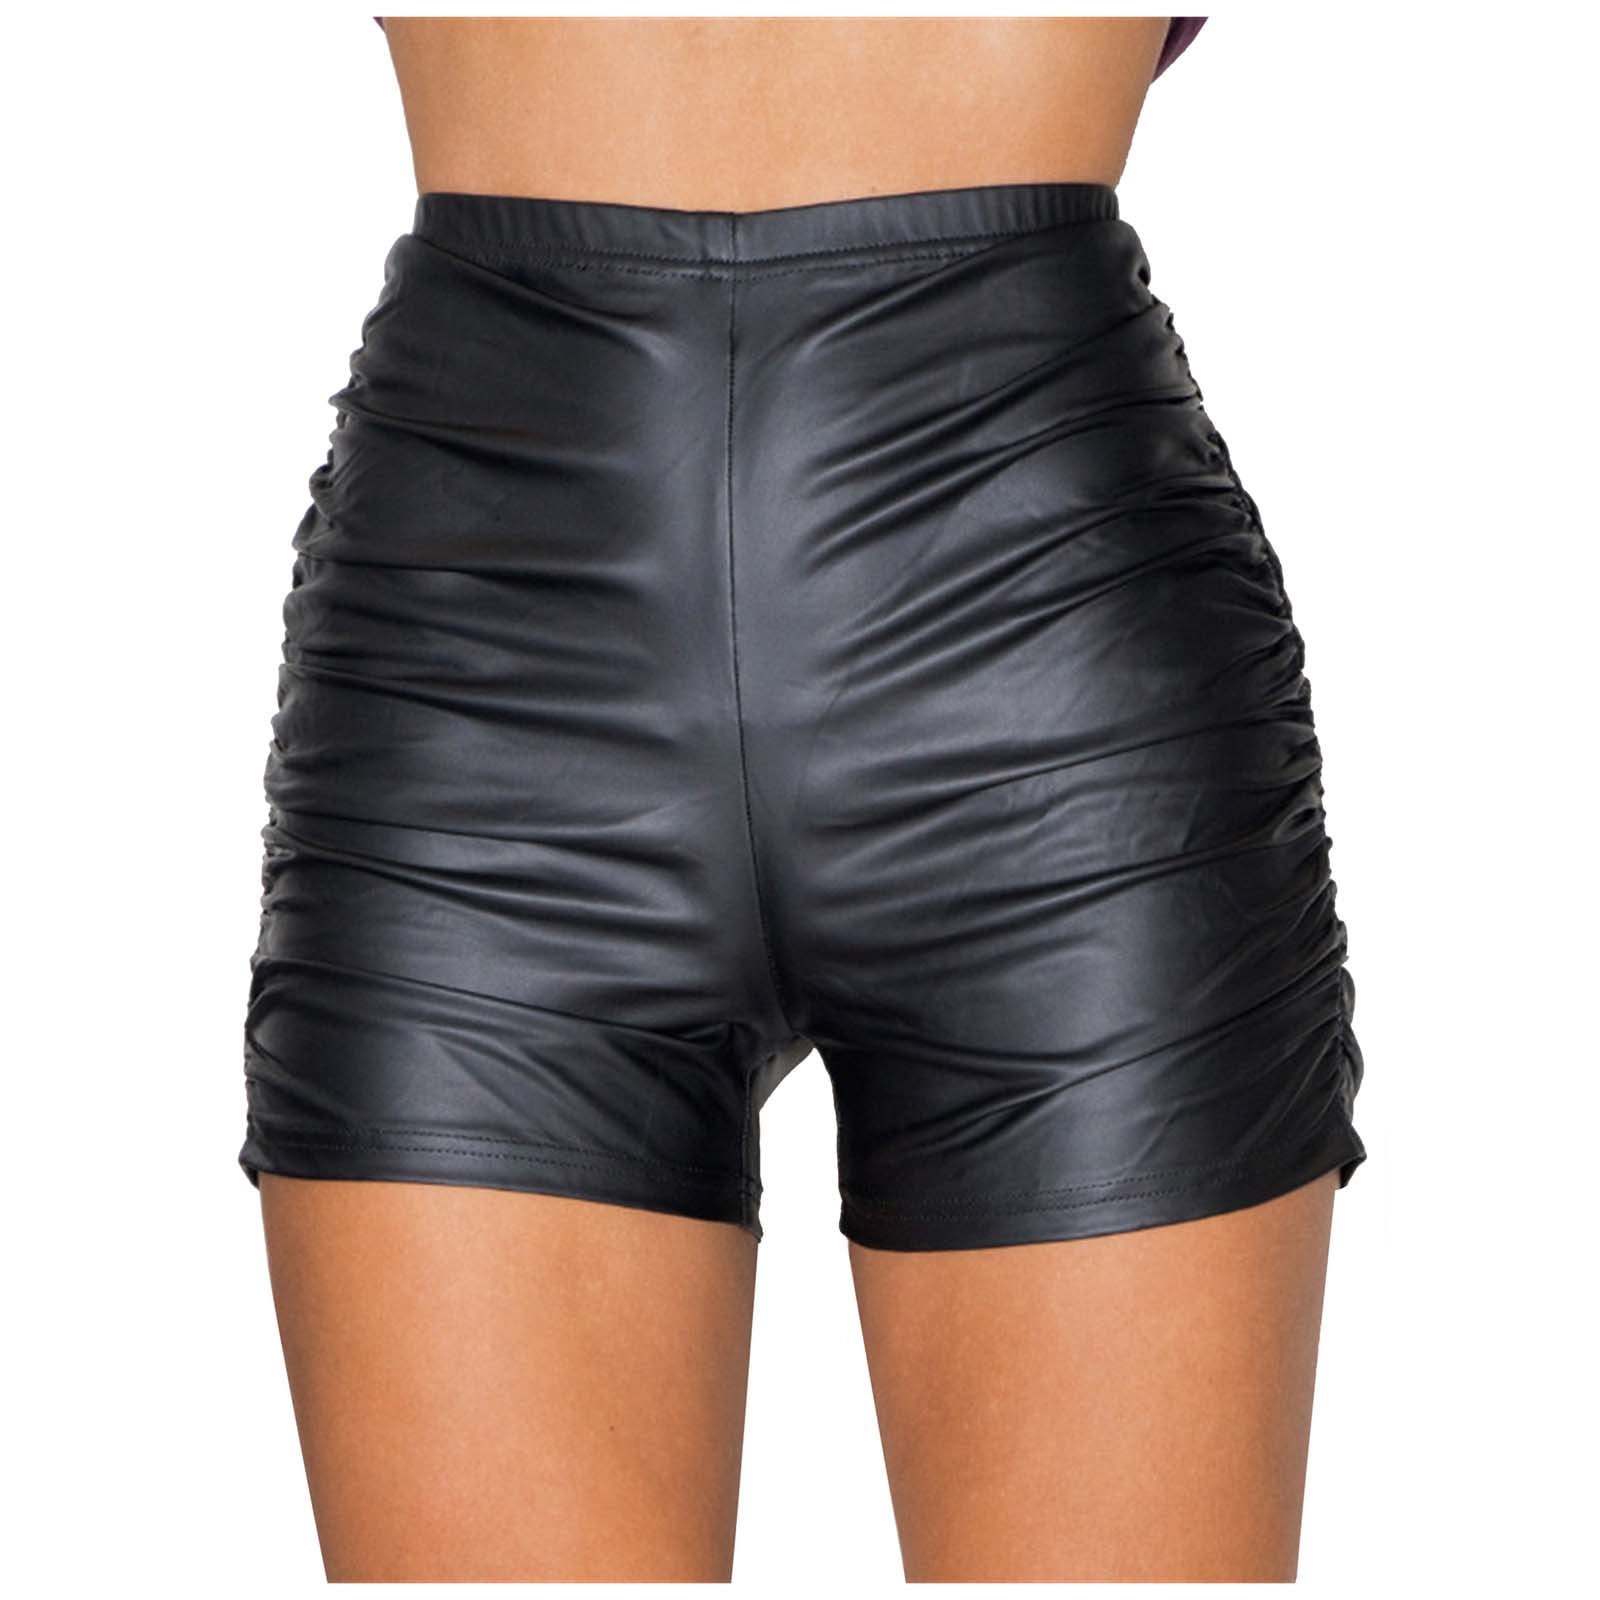 Women's Low Waist Leather Look Solid Shorts Hot Pants Casual Lace Booty  Shorts Underwear